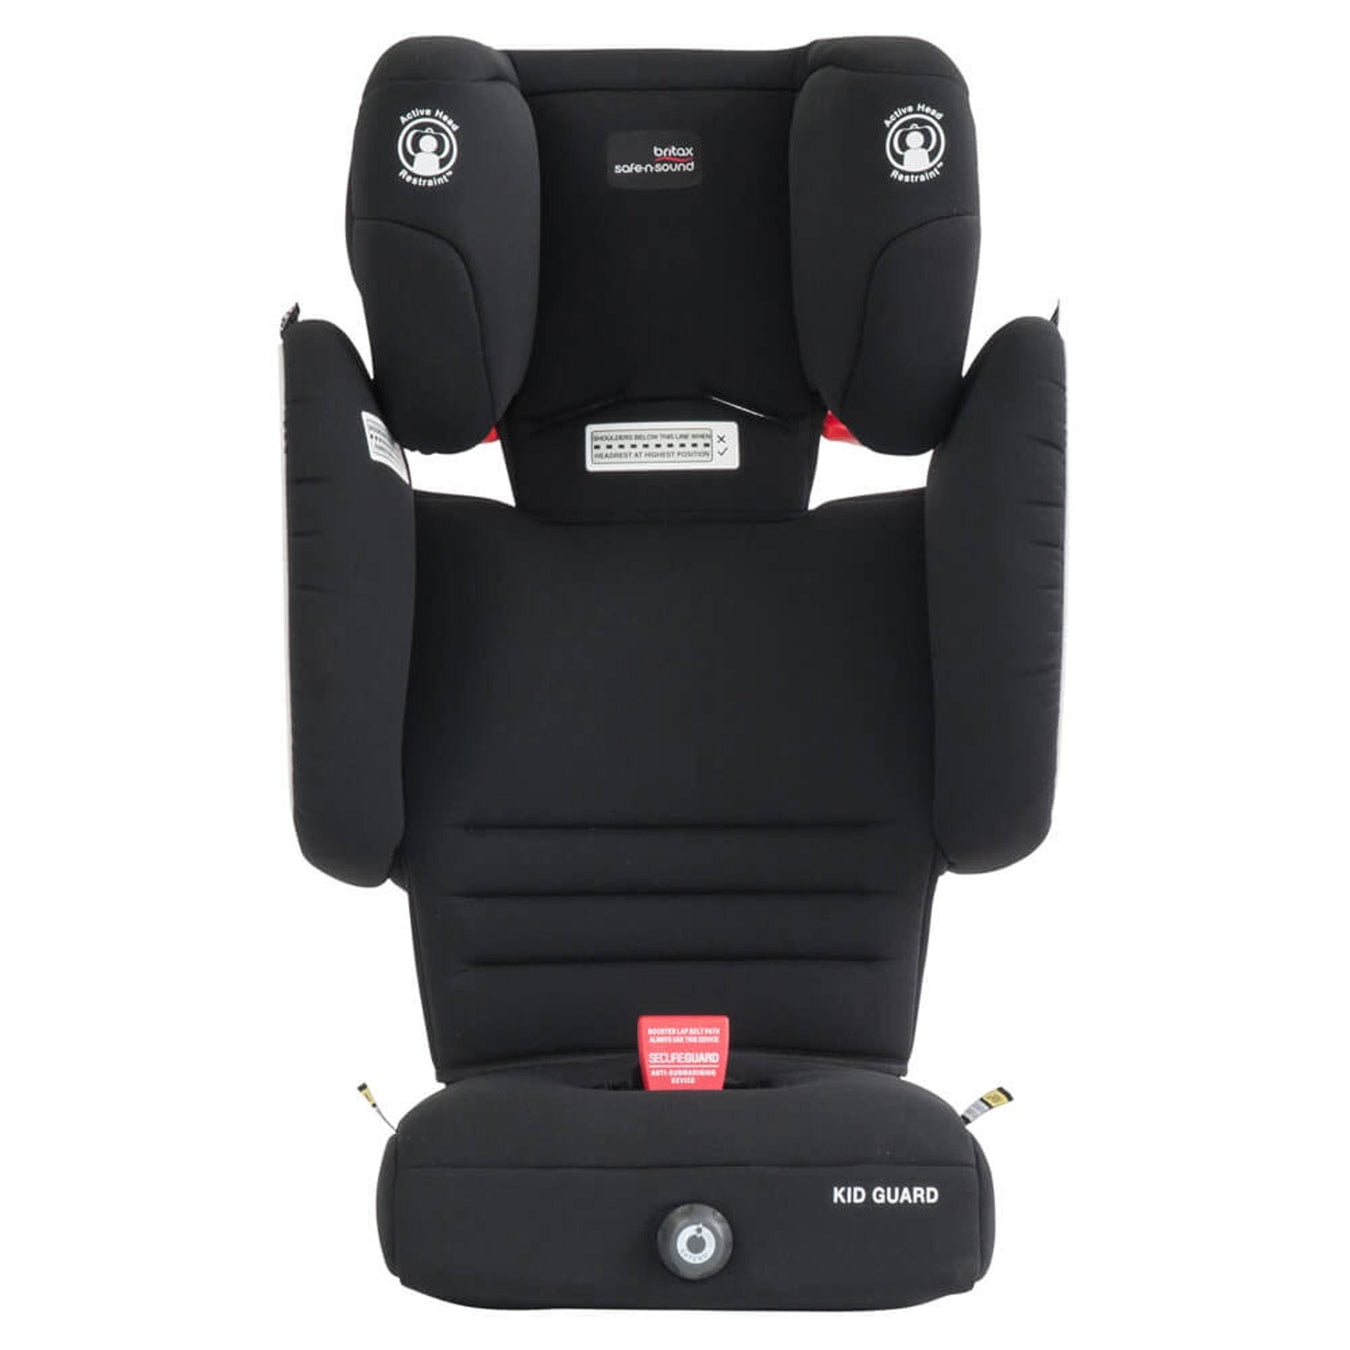 Booster Seats (4 Years to 8 Years)